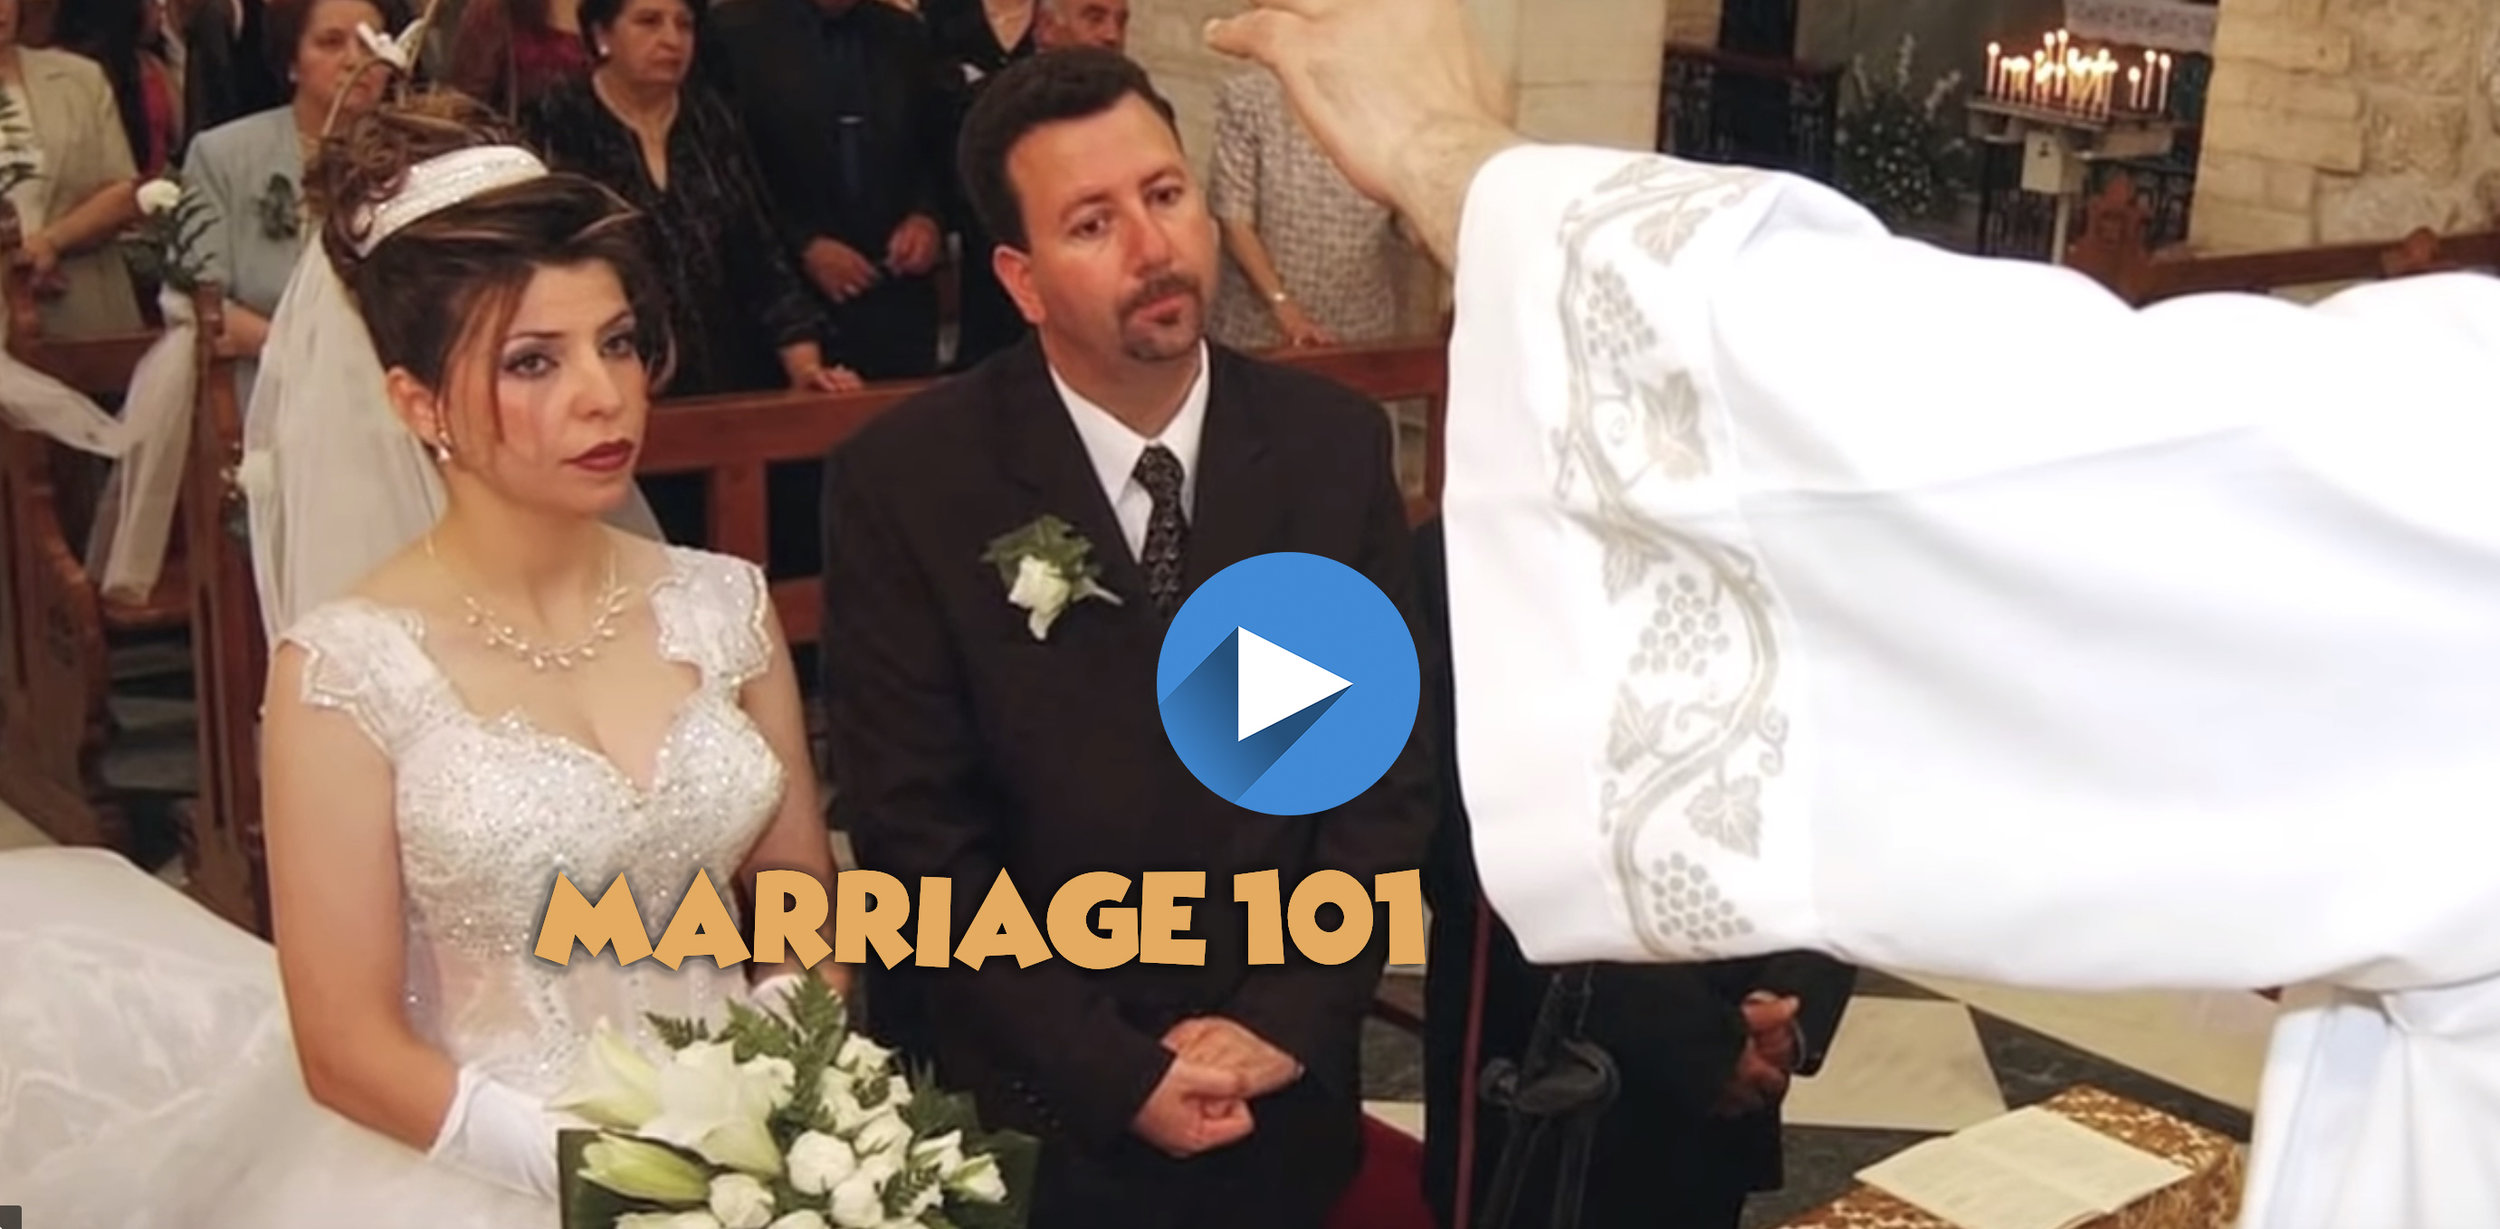 MARRIAGE VIDEO COVER 2 with arrow.jpg